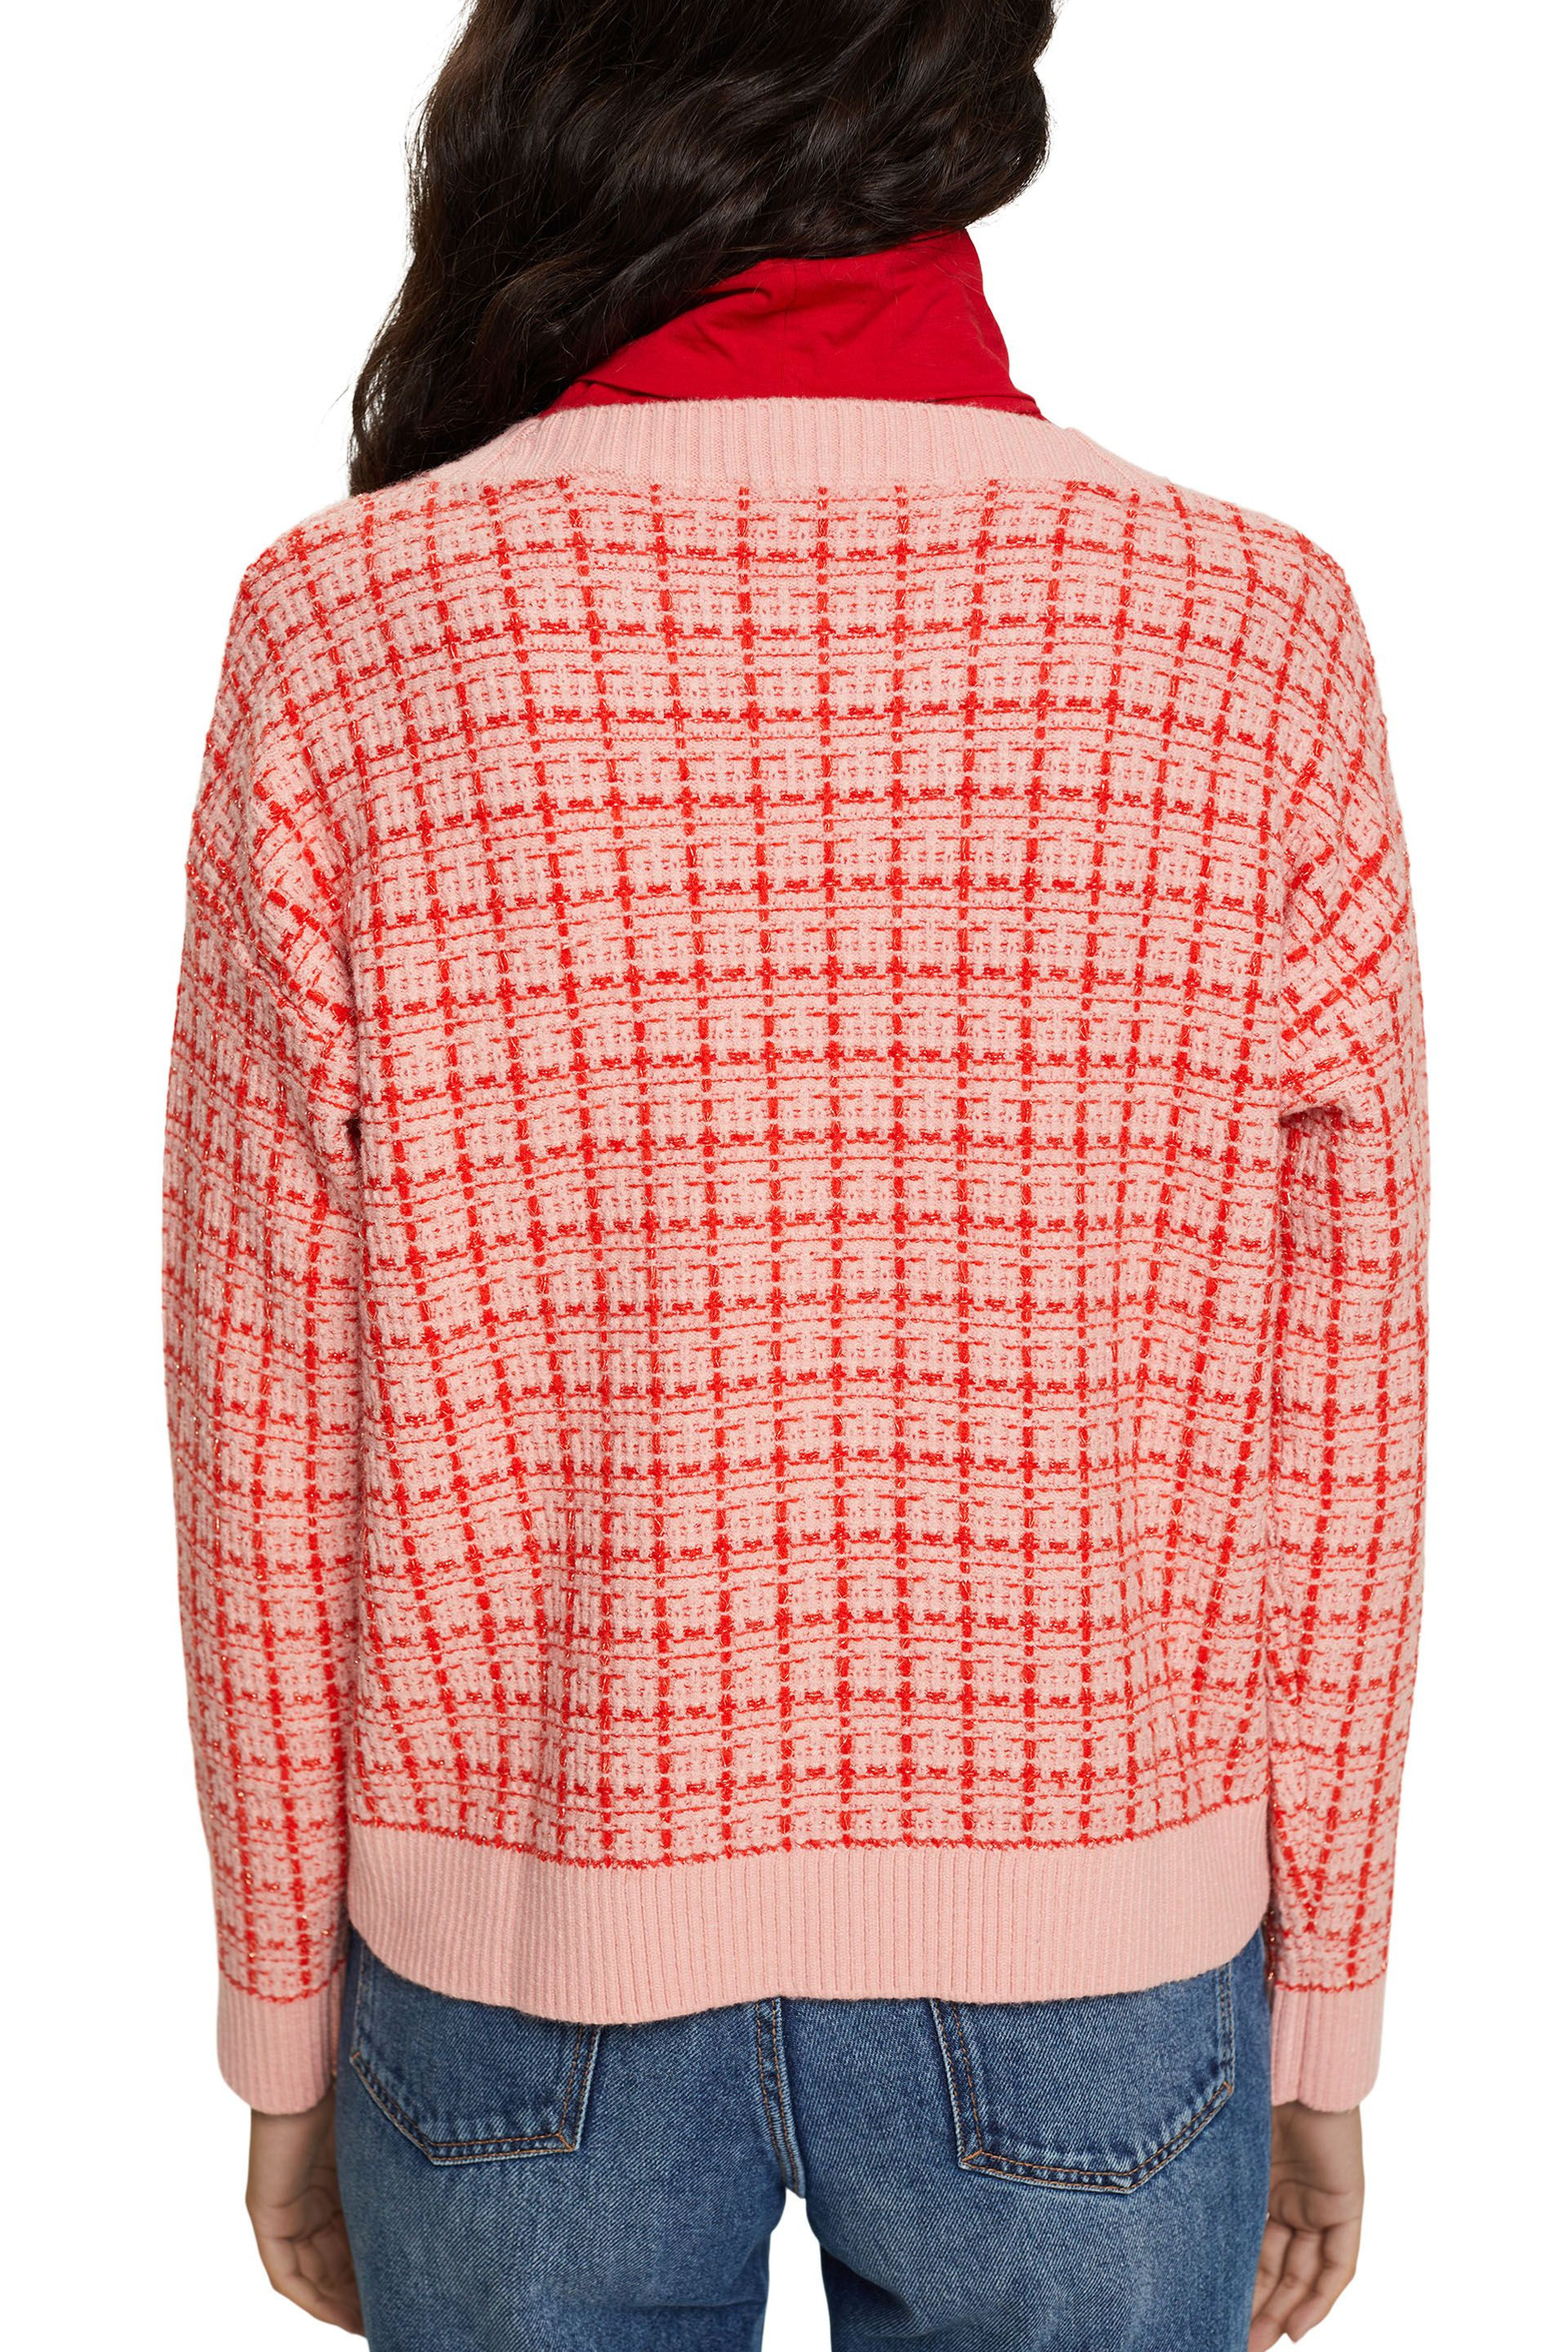 Esprit - Checked pullover, Pink, large image number 2